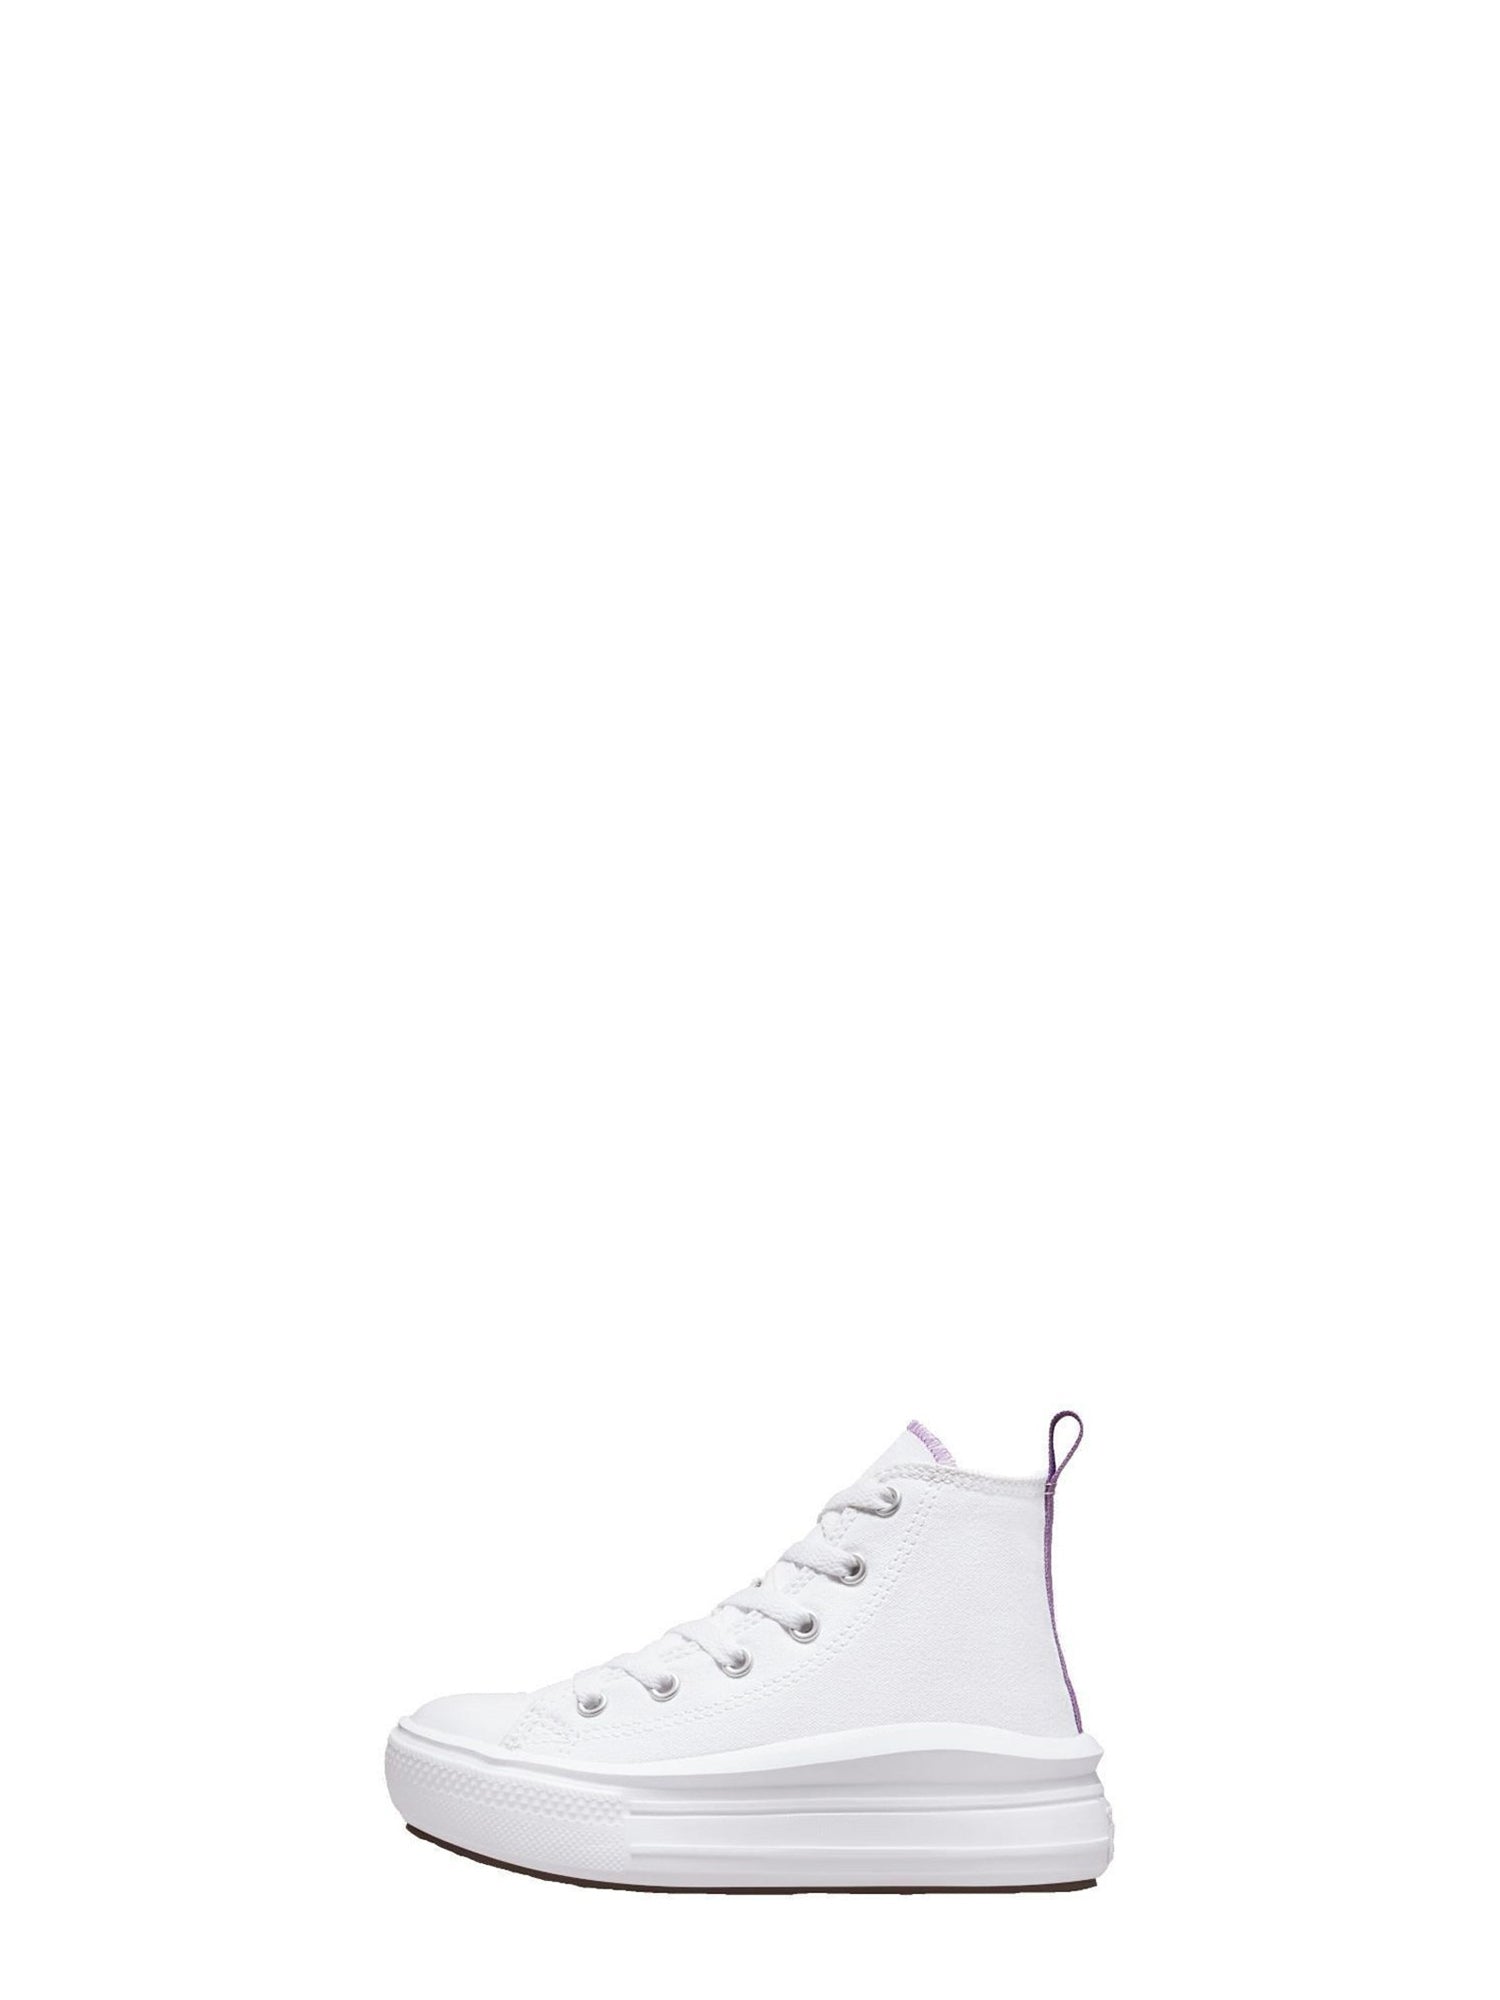 CONVERSE SNEAKERS CHUCK TAYLOR ALL STAR MOVE BIANCO